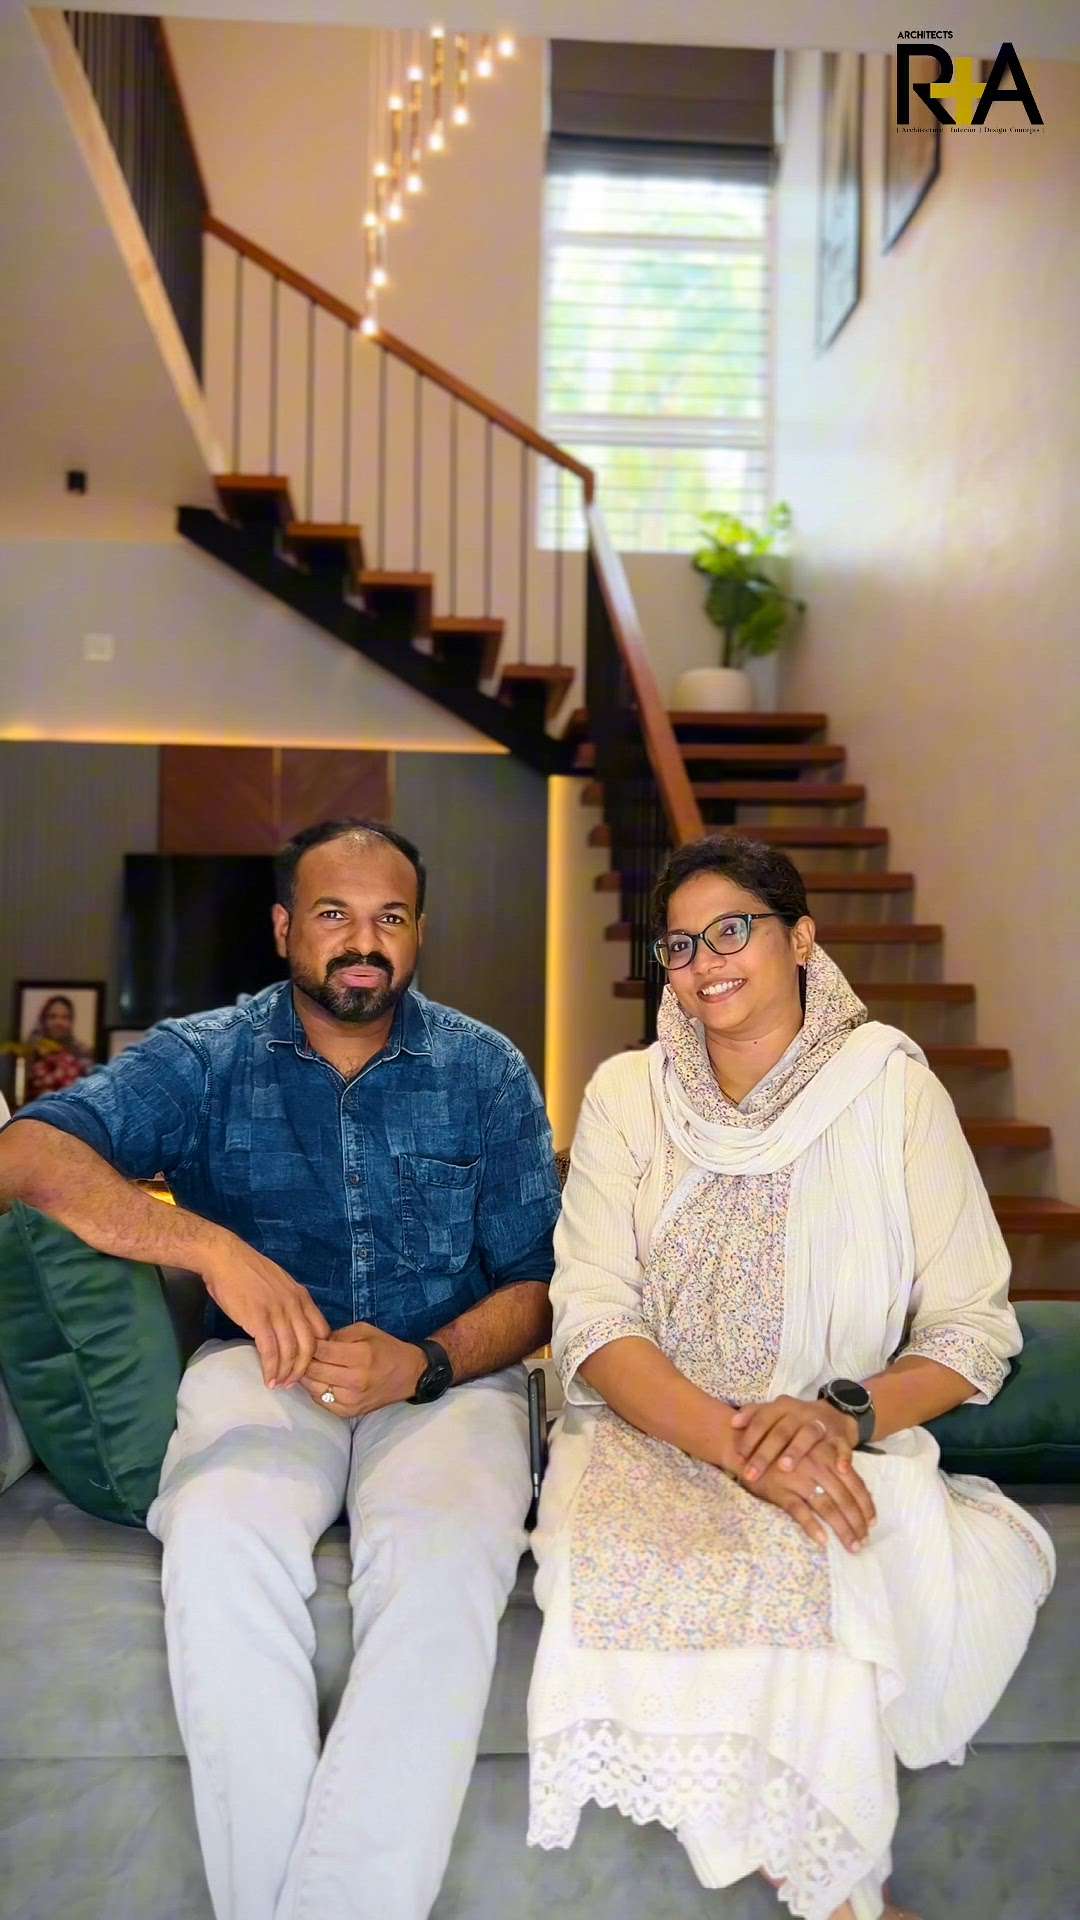 Happy clients ! 
. 
Thank you for trusting in us. 
. 
. 
. 
. 
. 
. 
. 
. 
. 
. 
. 
. 
. 
. 
. 
. 
. 
. 
. 
#keralahomes #kerala #architecture #keralahomedesign #interiordesign #homedecor #home #homesweethome #interior #keralaarchitecture #interiordesigner #homedesign #keralahomeplanners #homedesignideas #homedecoration #keralainteriordesign #bestarchitectsinkerala #architect #archdaily #ddesign #homestyling #traditional #keralahome #freekeralahomeplans #homeplans #keralahouse #exteriordesign #architecturedesign #ddrawing #rplusaarchitects lusaarchitects